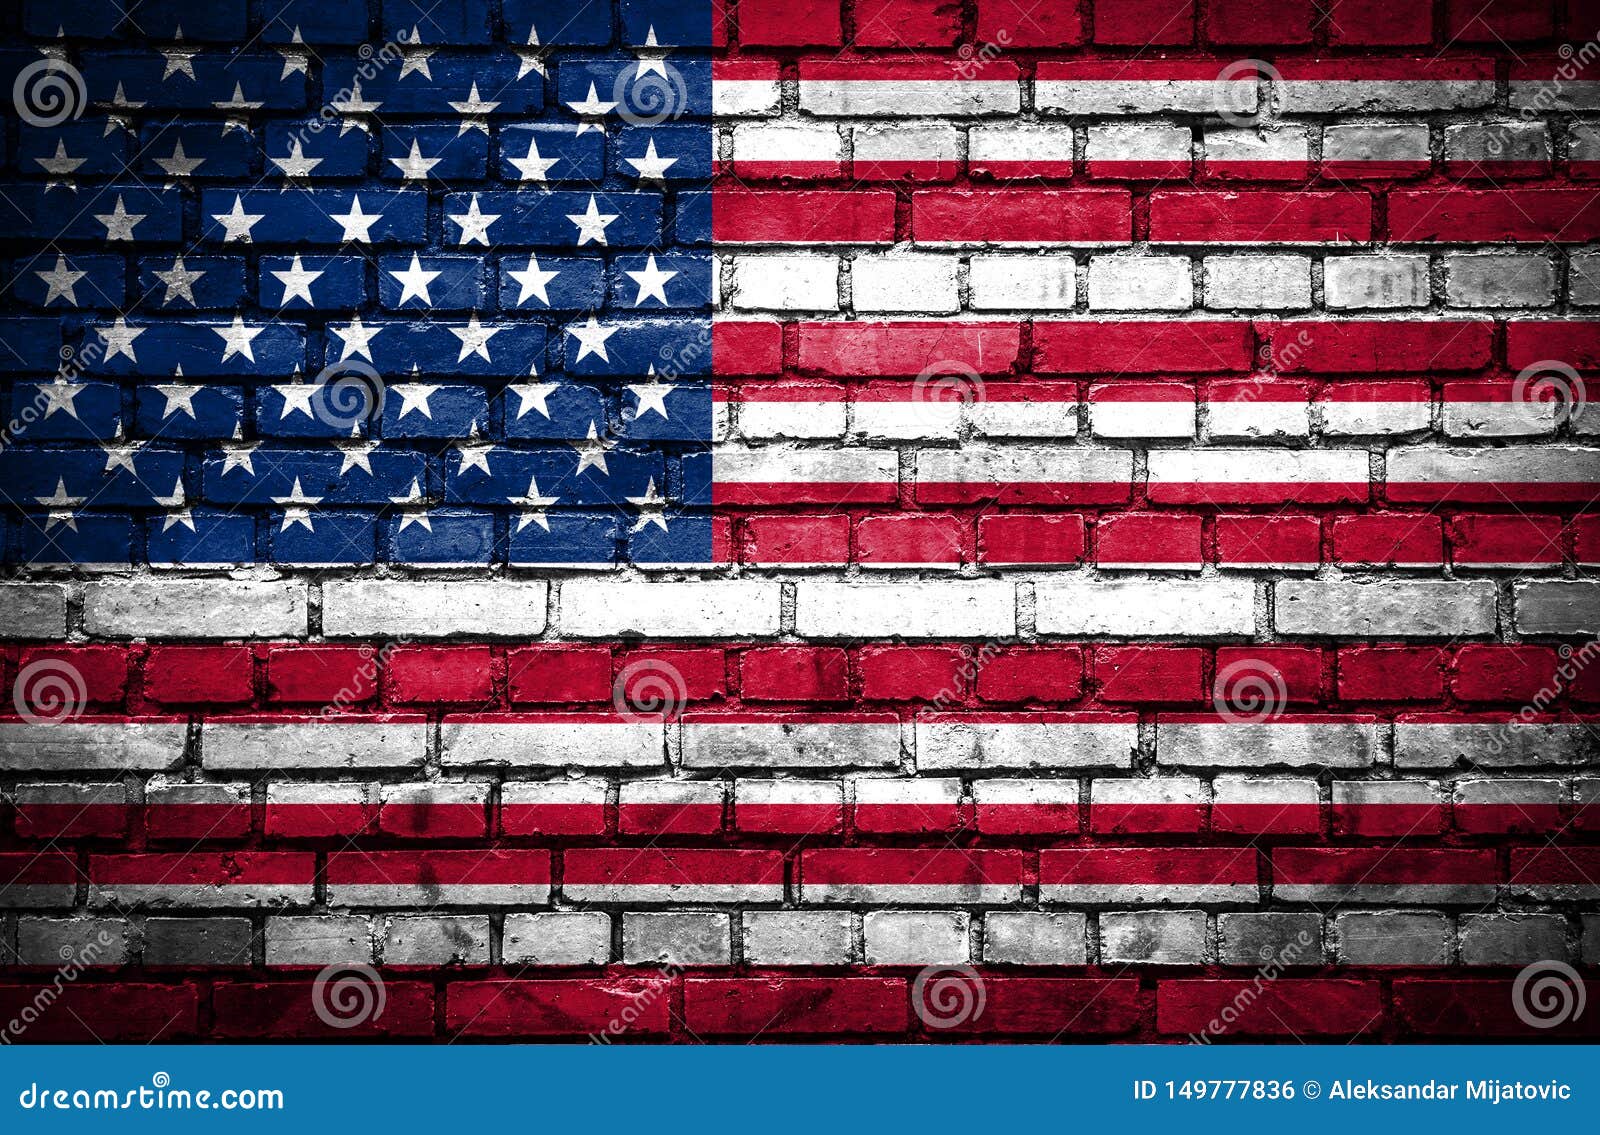 Brick Wall With Painted Flag Of United States Of America Stock